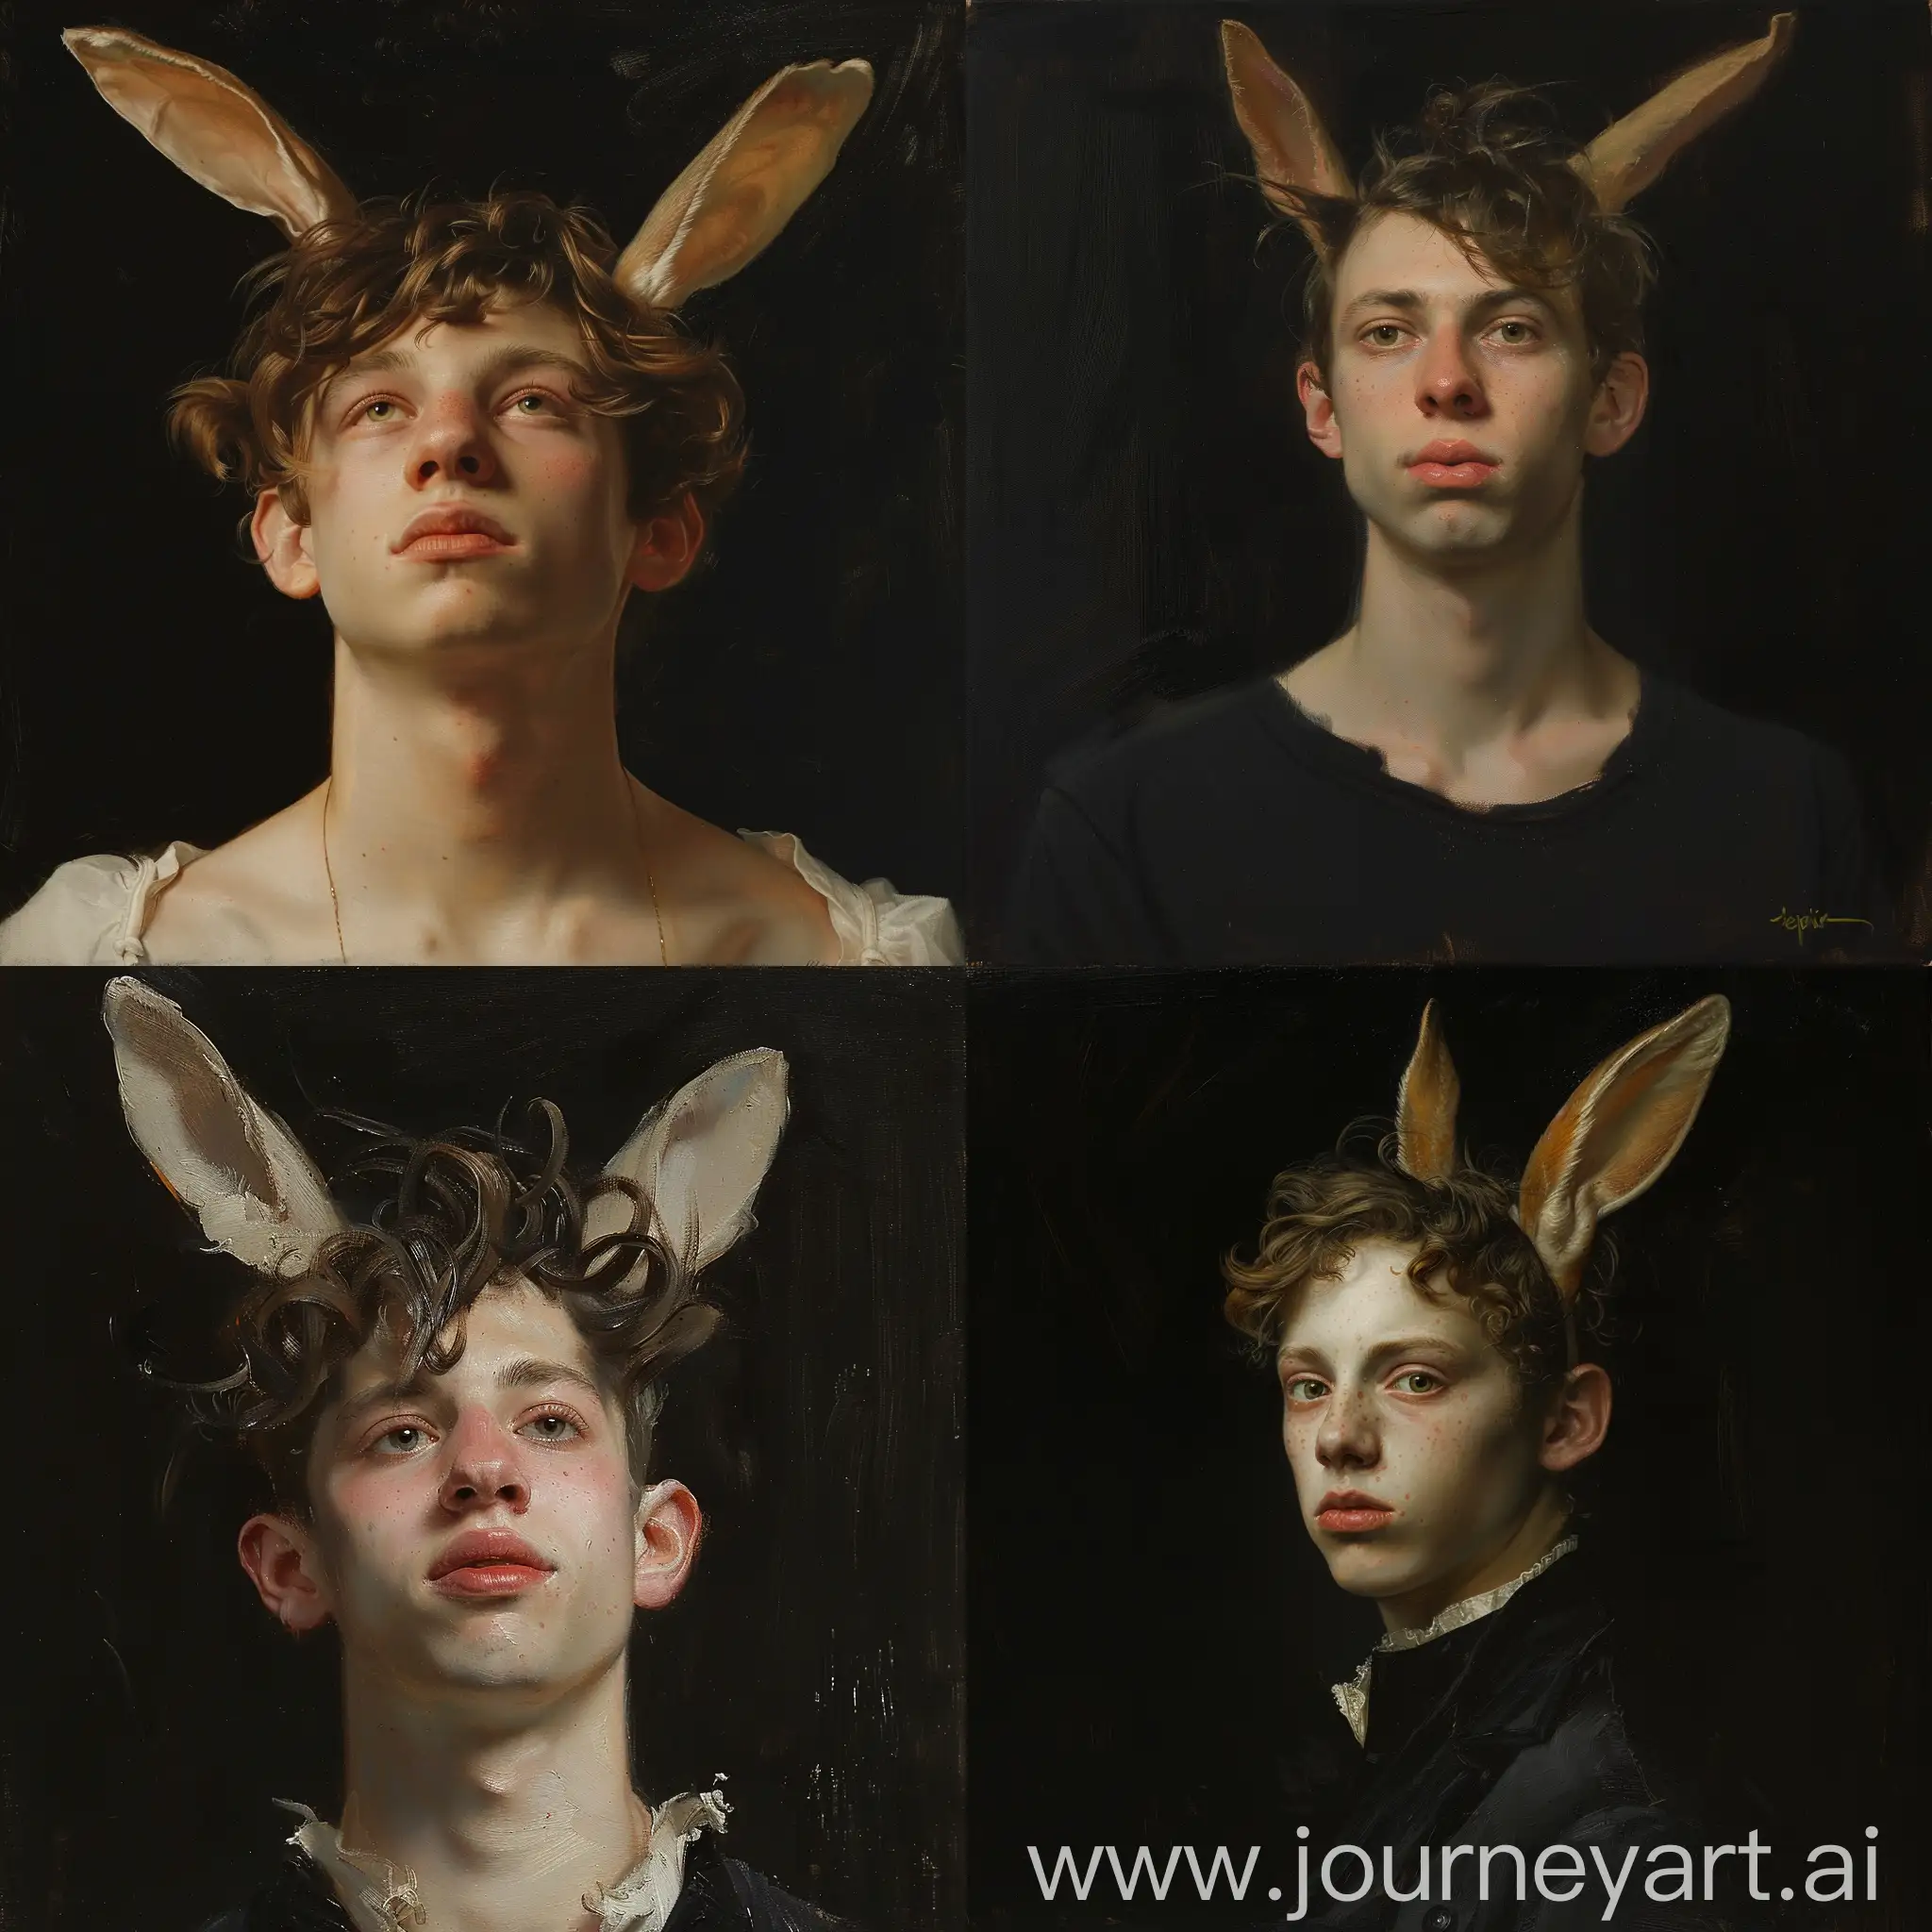 a painting of a young man with rabbit ears, wlop John singer Sargent, jeremy lipkin and rob rey, range murata jeremy lipking, John singer Sargent, black background, jeremy lipkin, lensculture portrait awards, casey baugh and james jean, detailed realism in painting, award-winning portrait, amazingly detailed oil painting